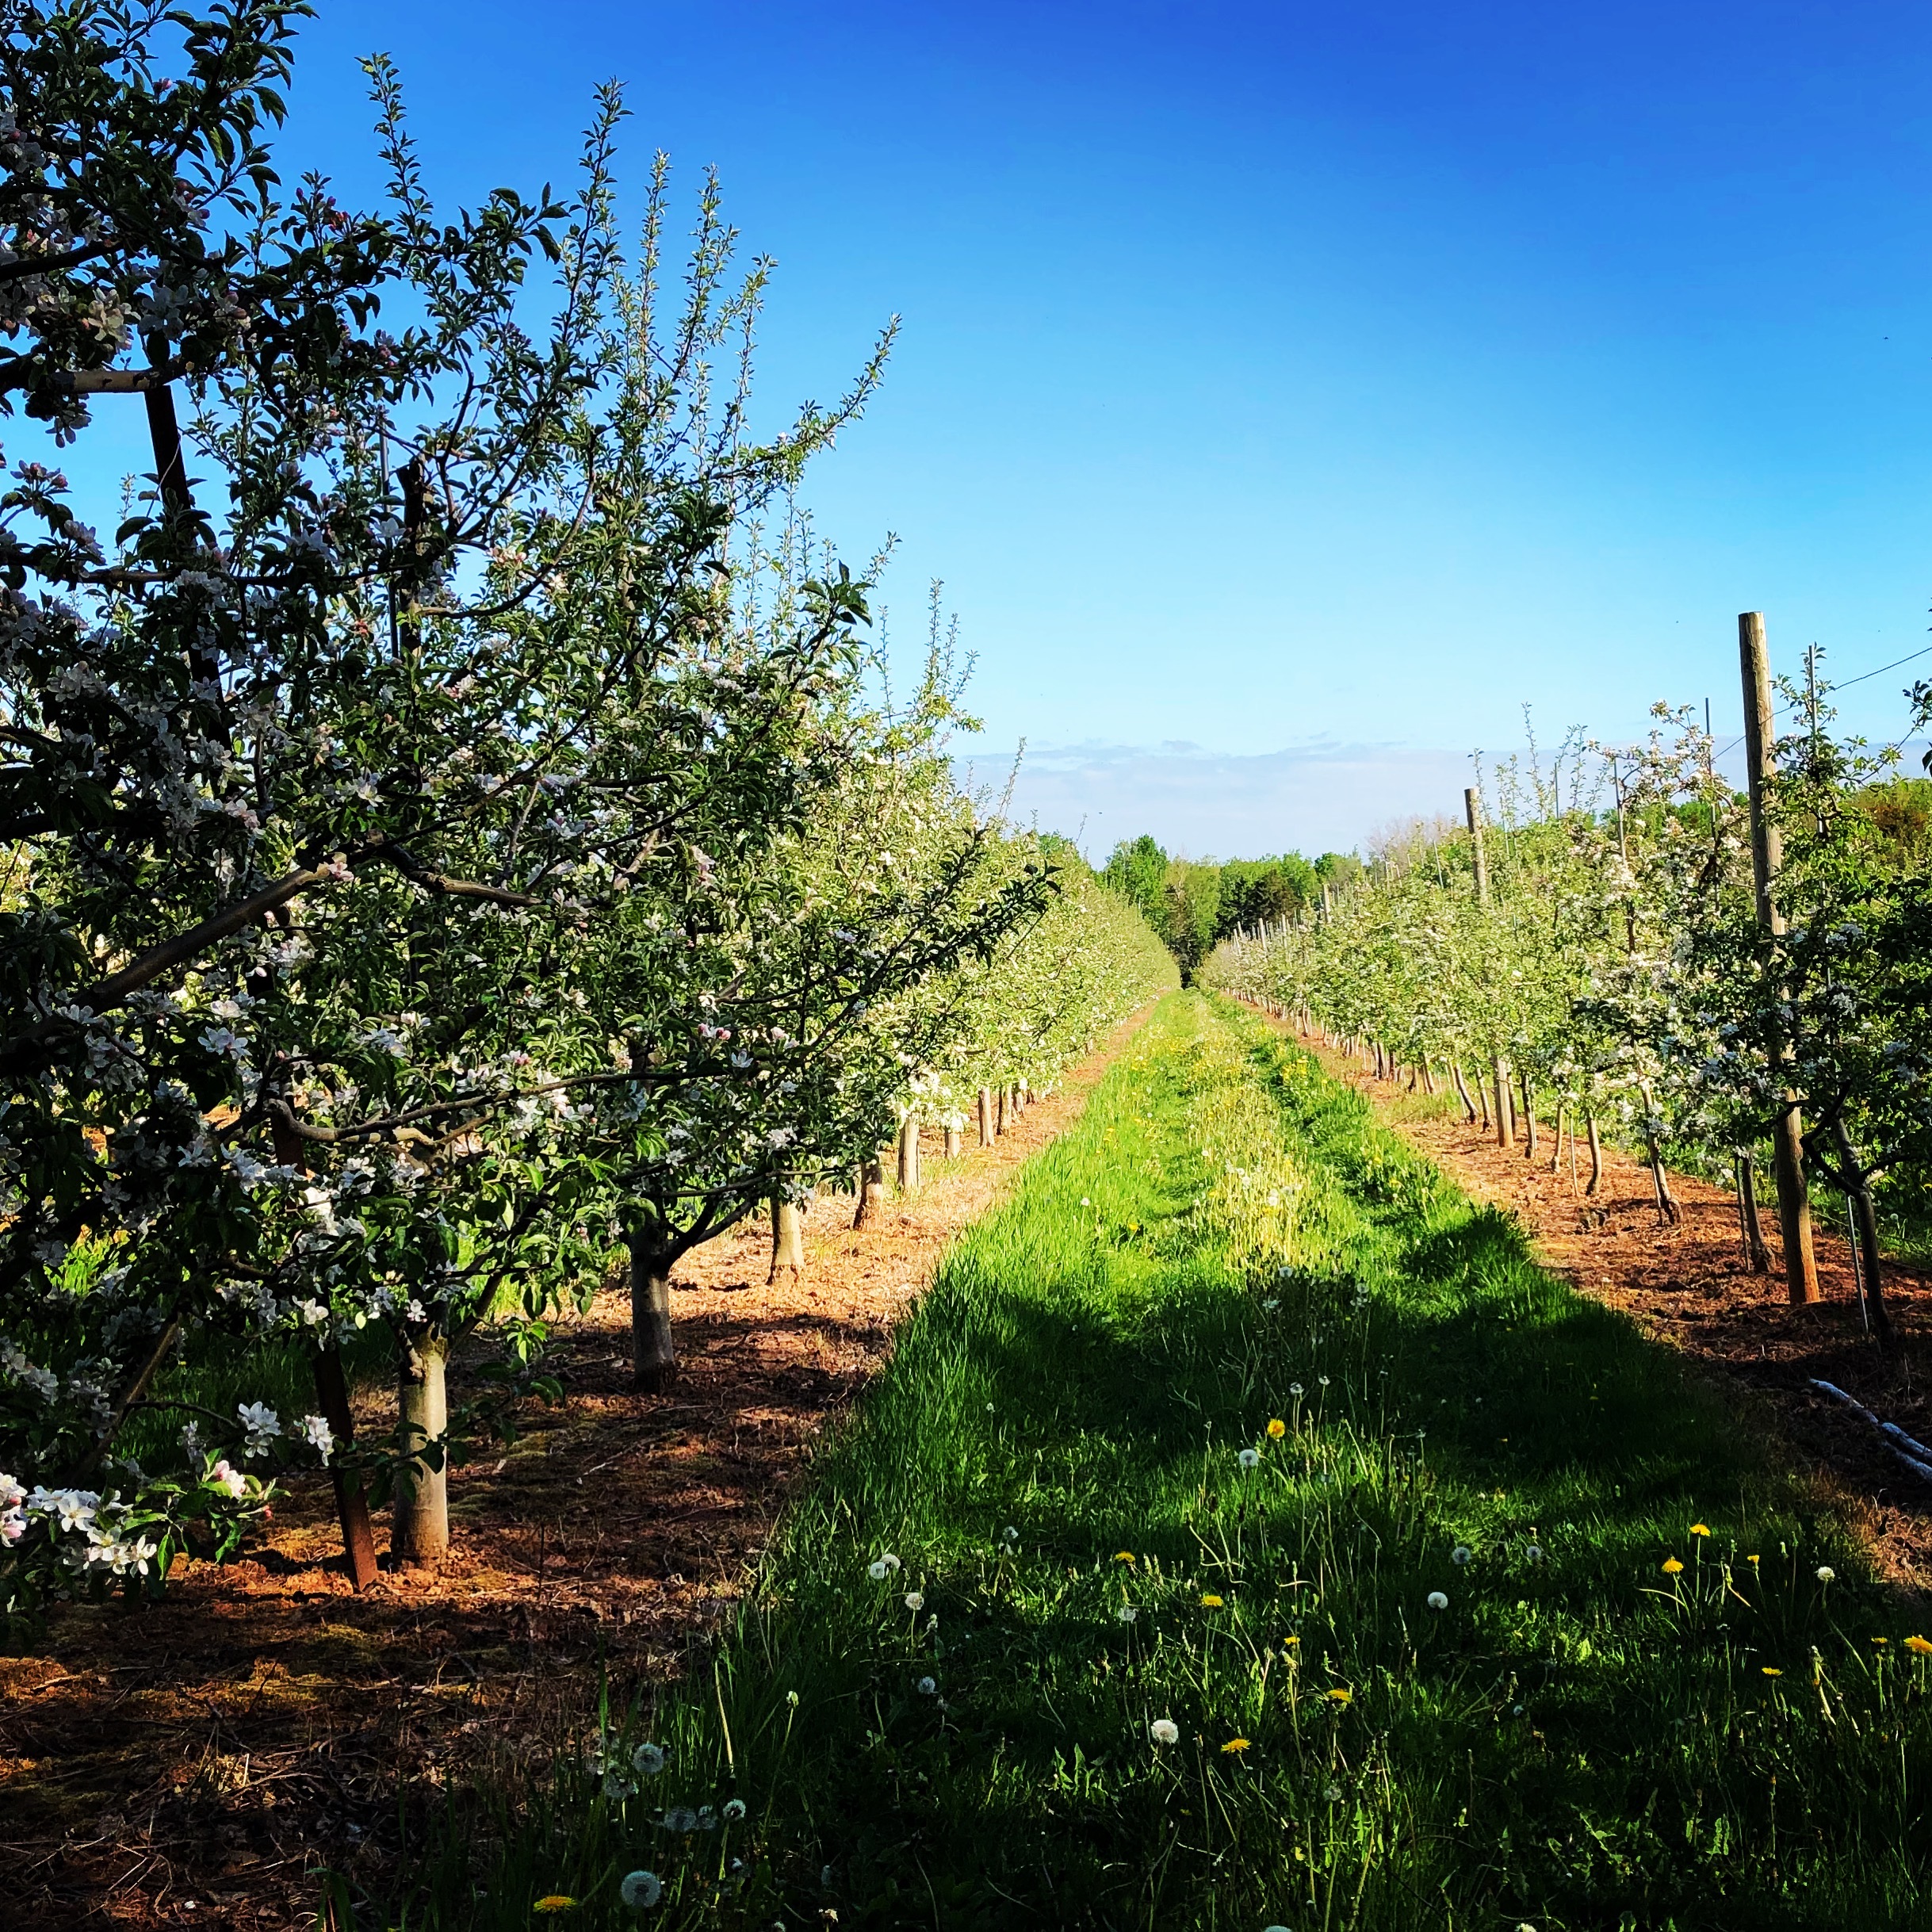 Apple orchards